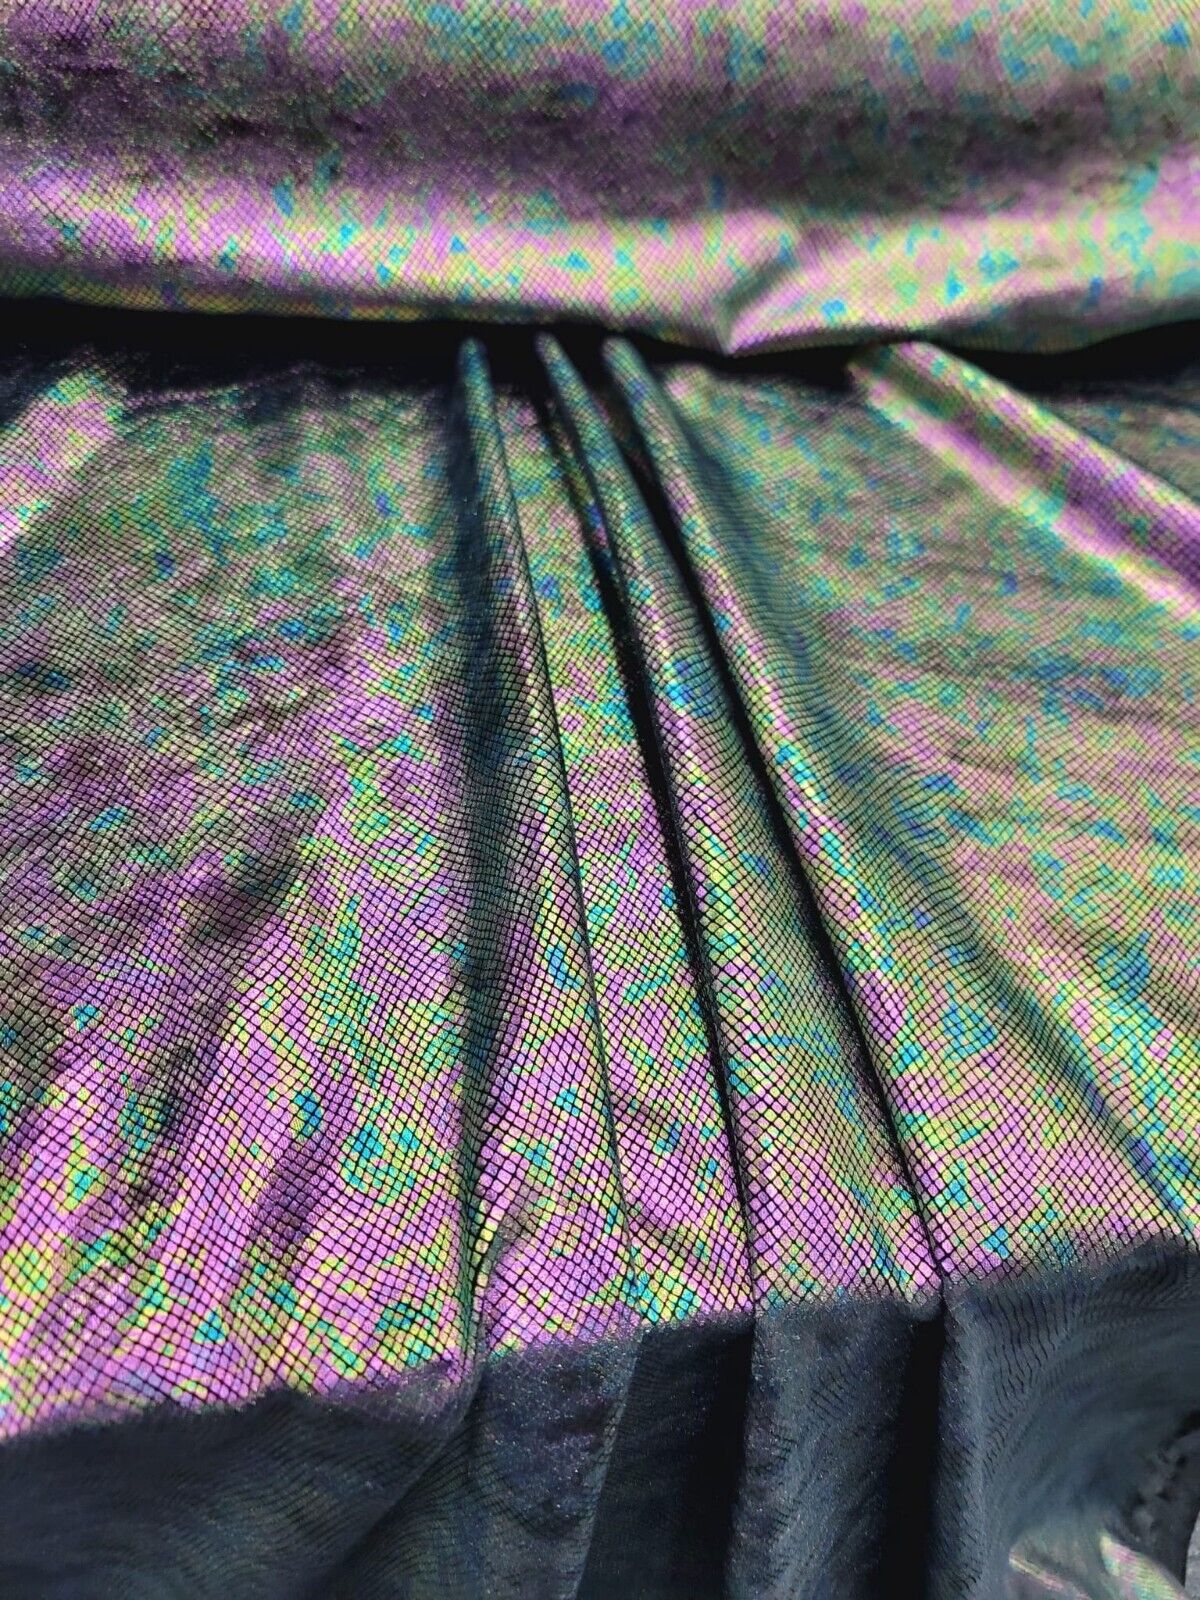 Exotic Design Iridescent Black Green Purple Print On Stretch Velvet Foil Fabric - Sold By the Yard